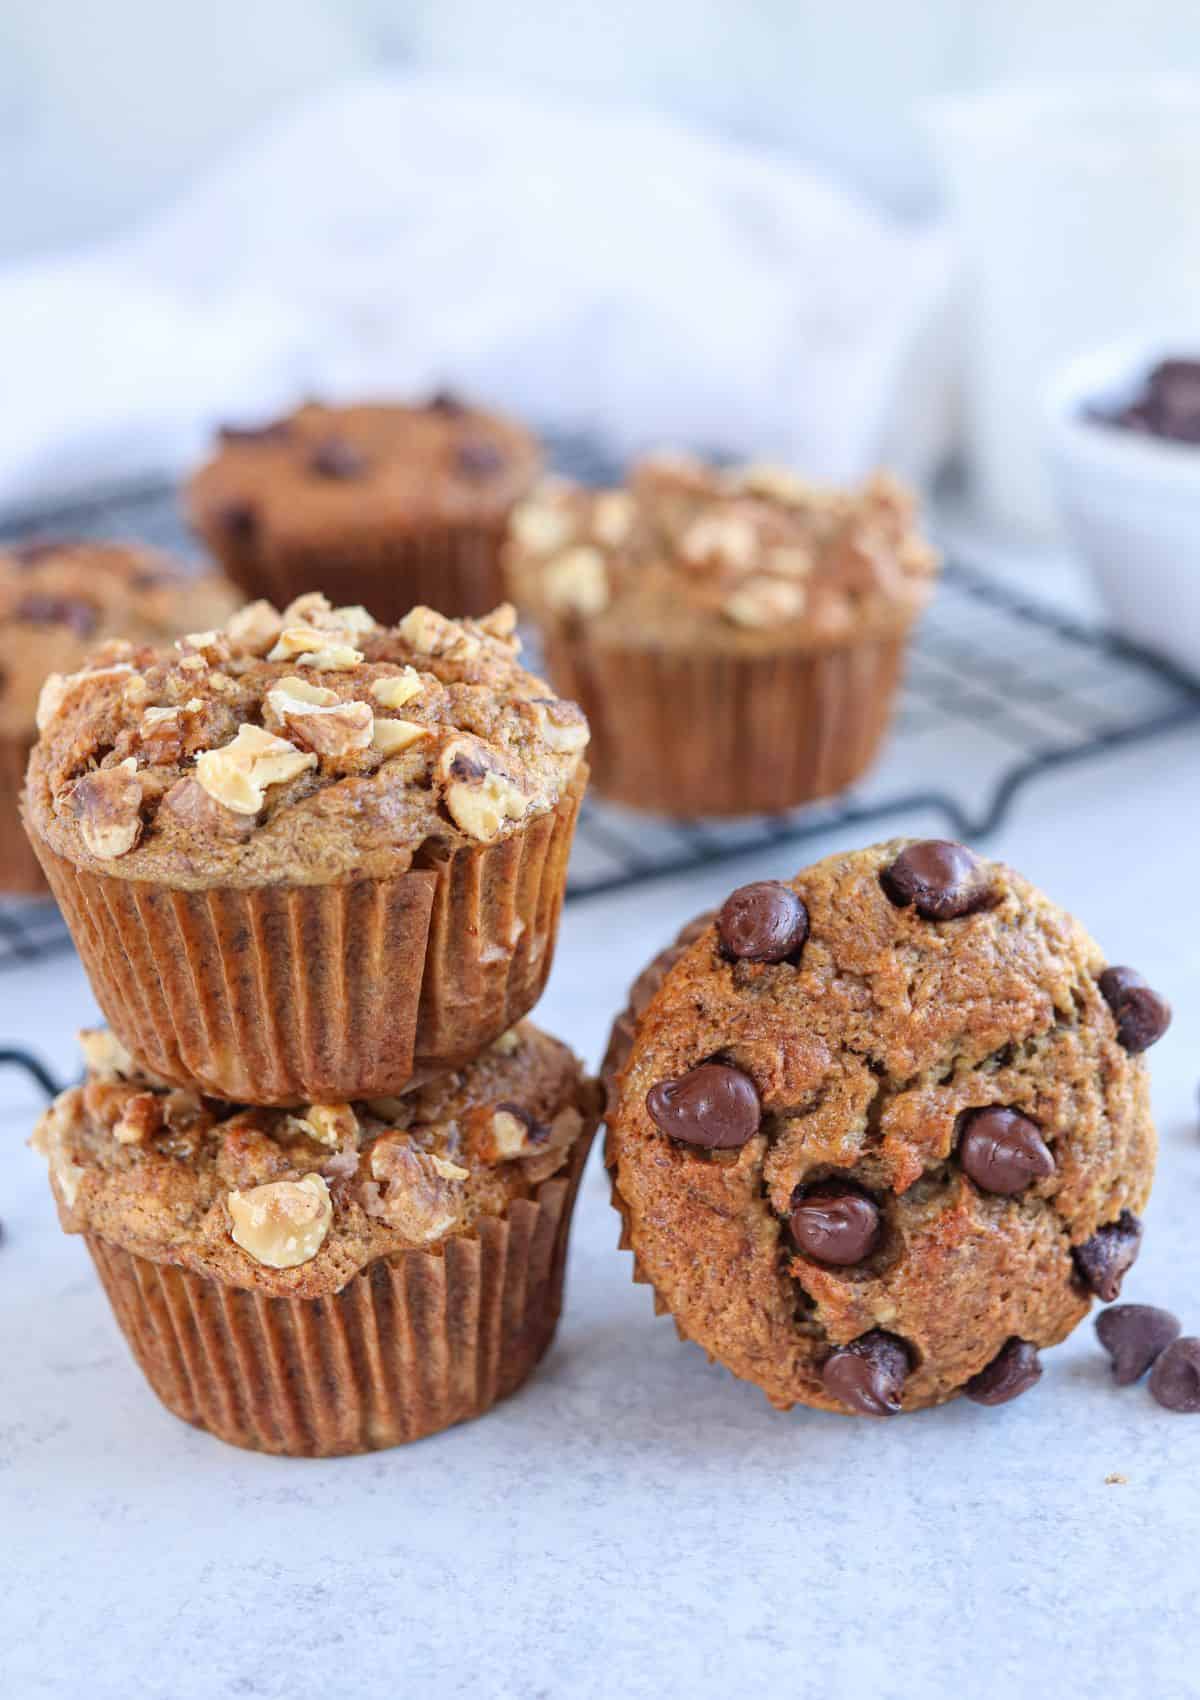 banana muffins with walnuts and chocolate chips stacked on light gray surface.